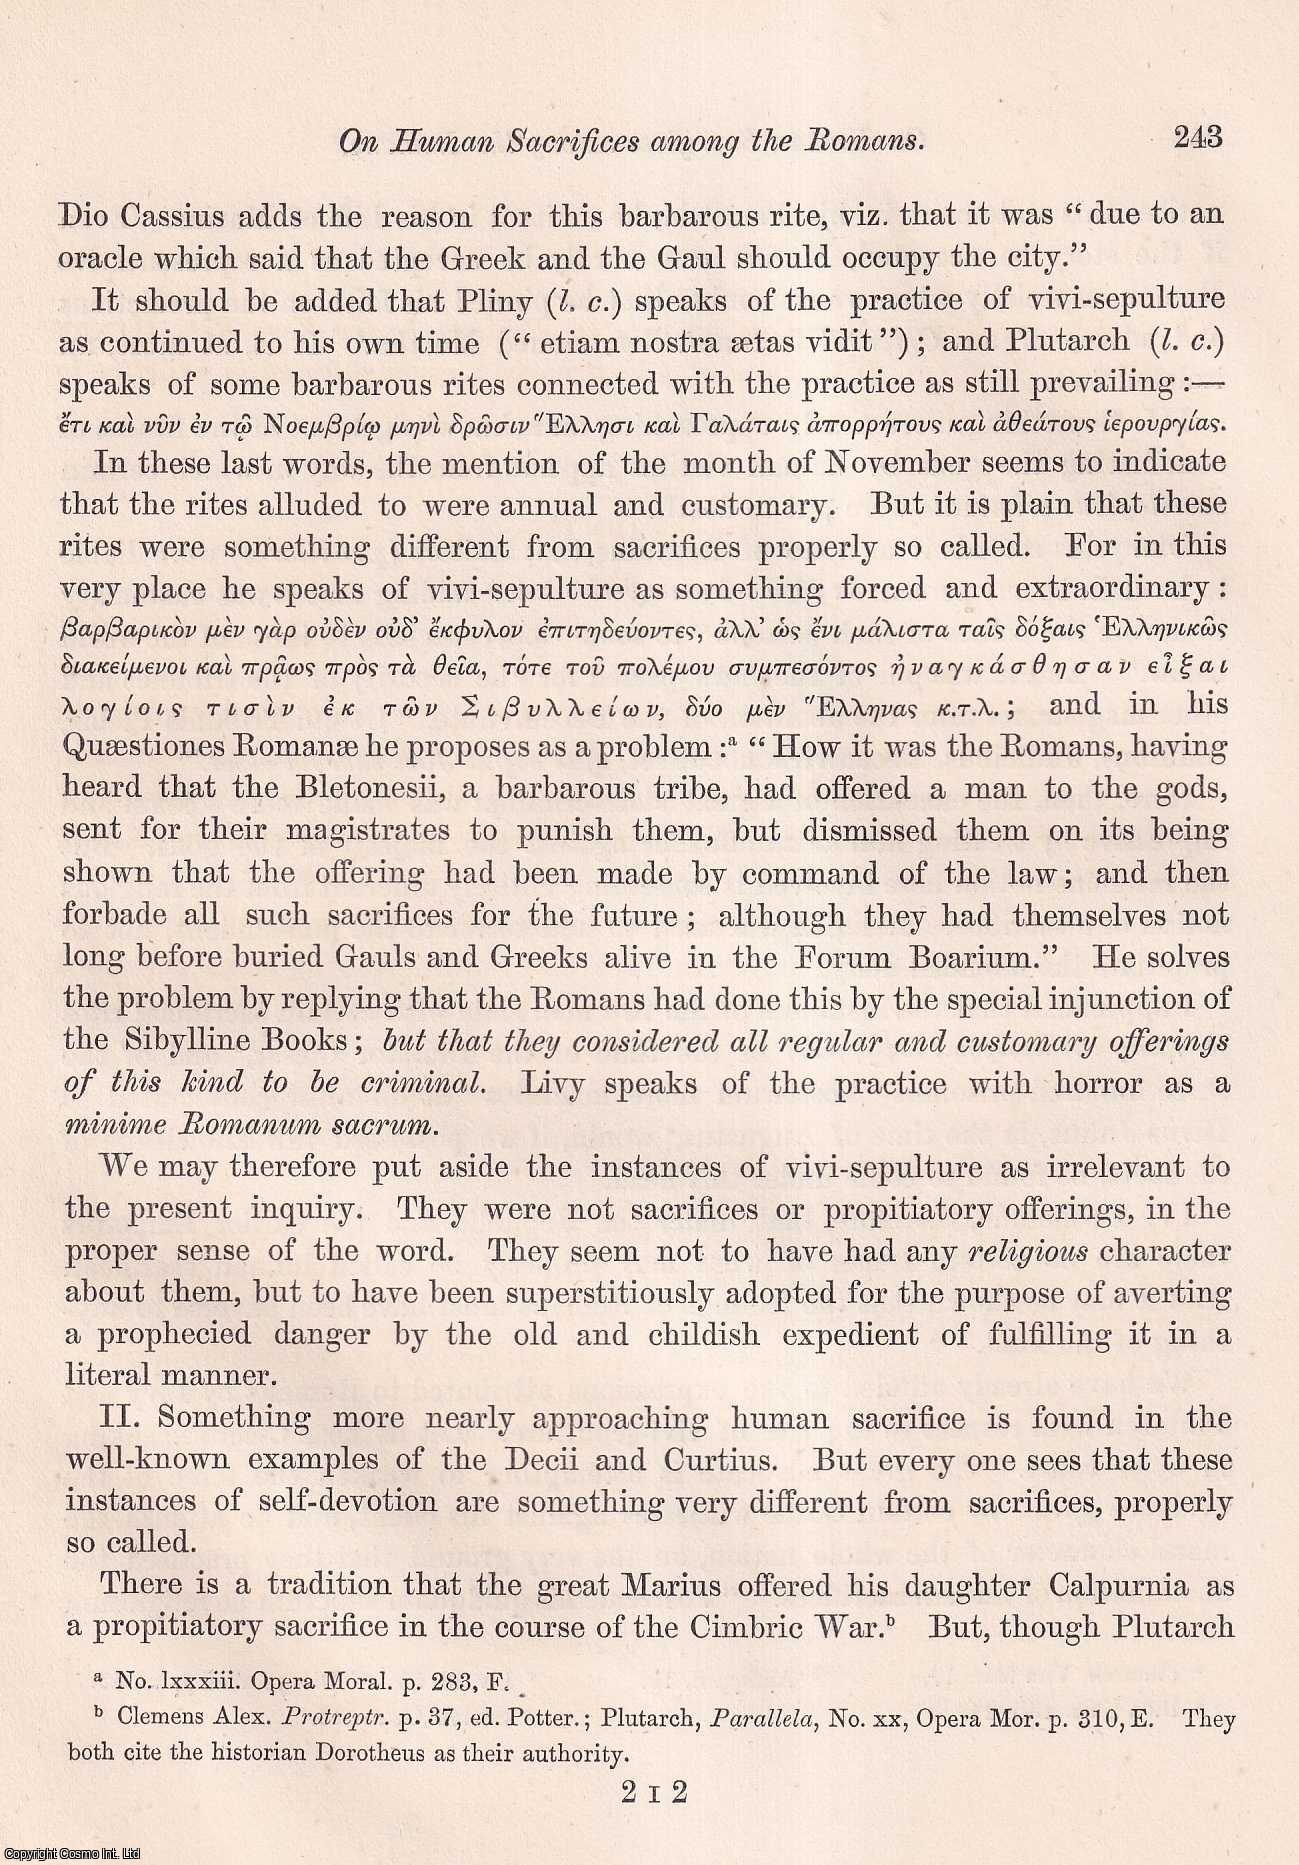 Very Rev. Henry George Liddell, D.D. - Notes on Human Sacrifices among the Romans. An uncommon original article from the journal Archaeologia, 1866.